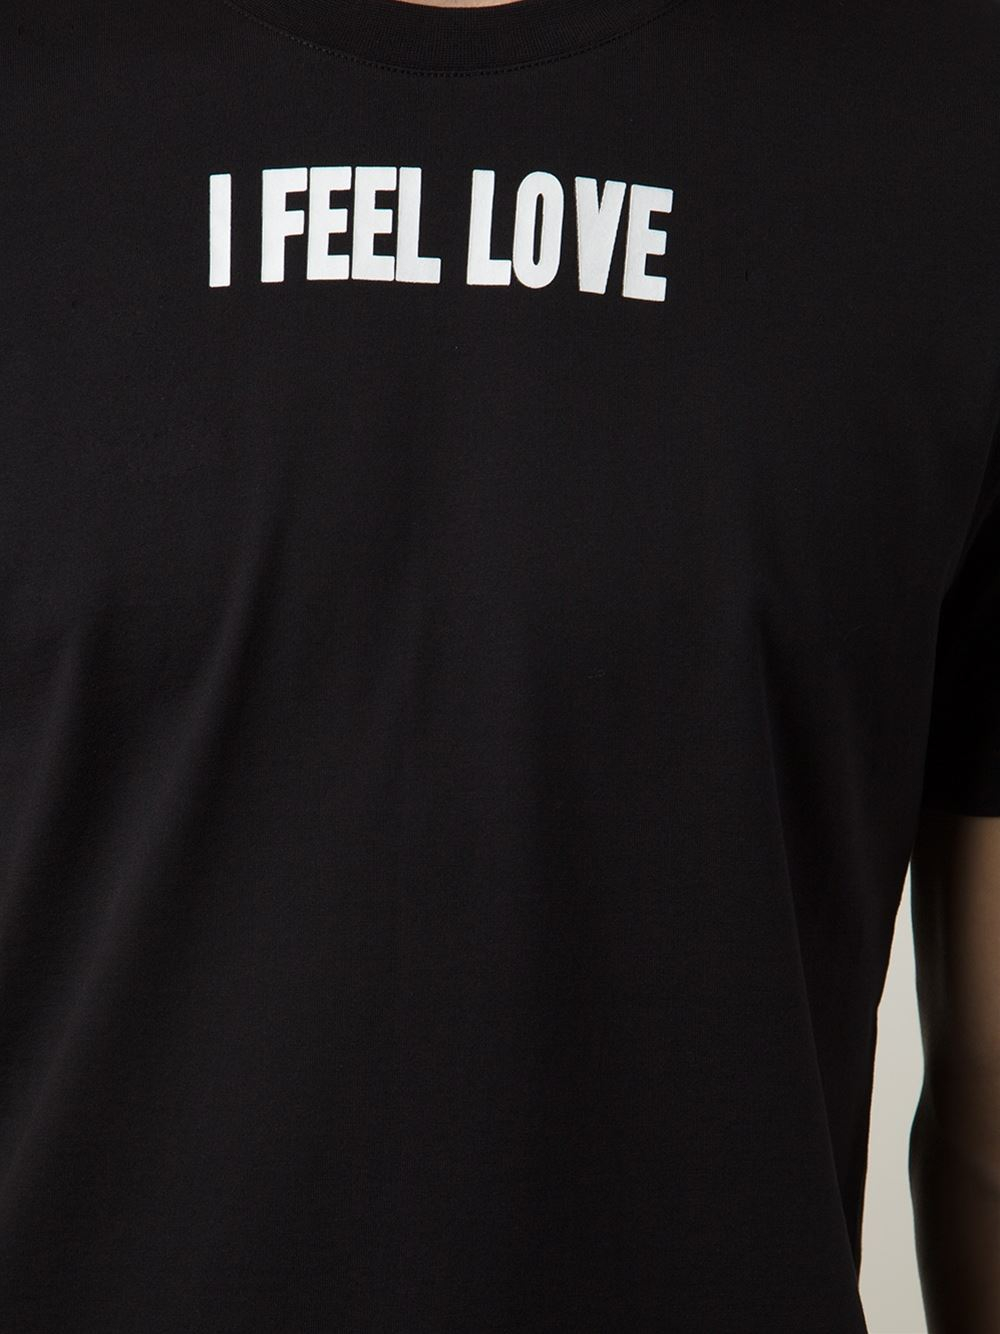 Givenchy t shirt i feel love store